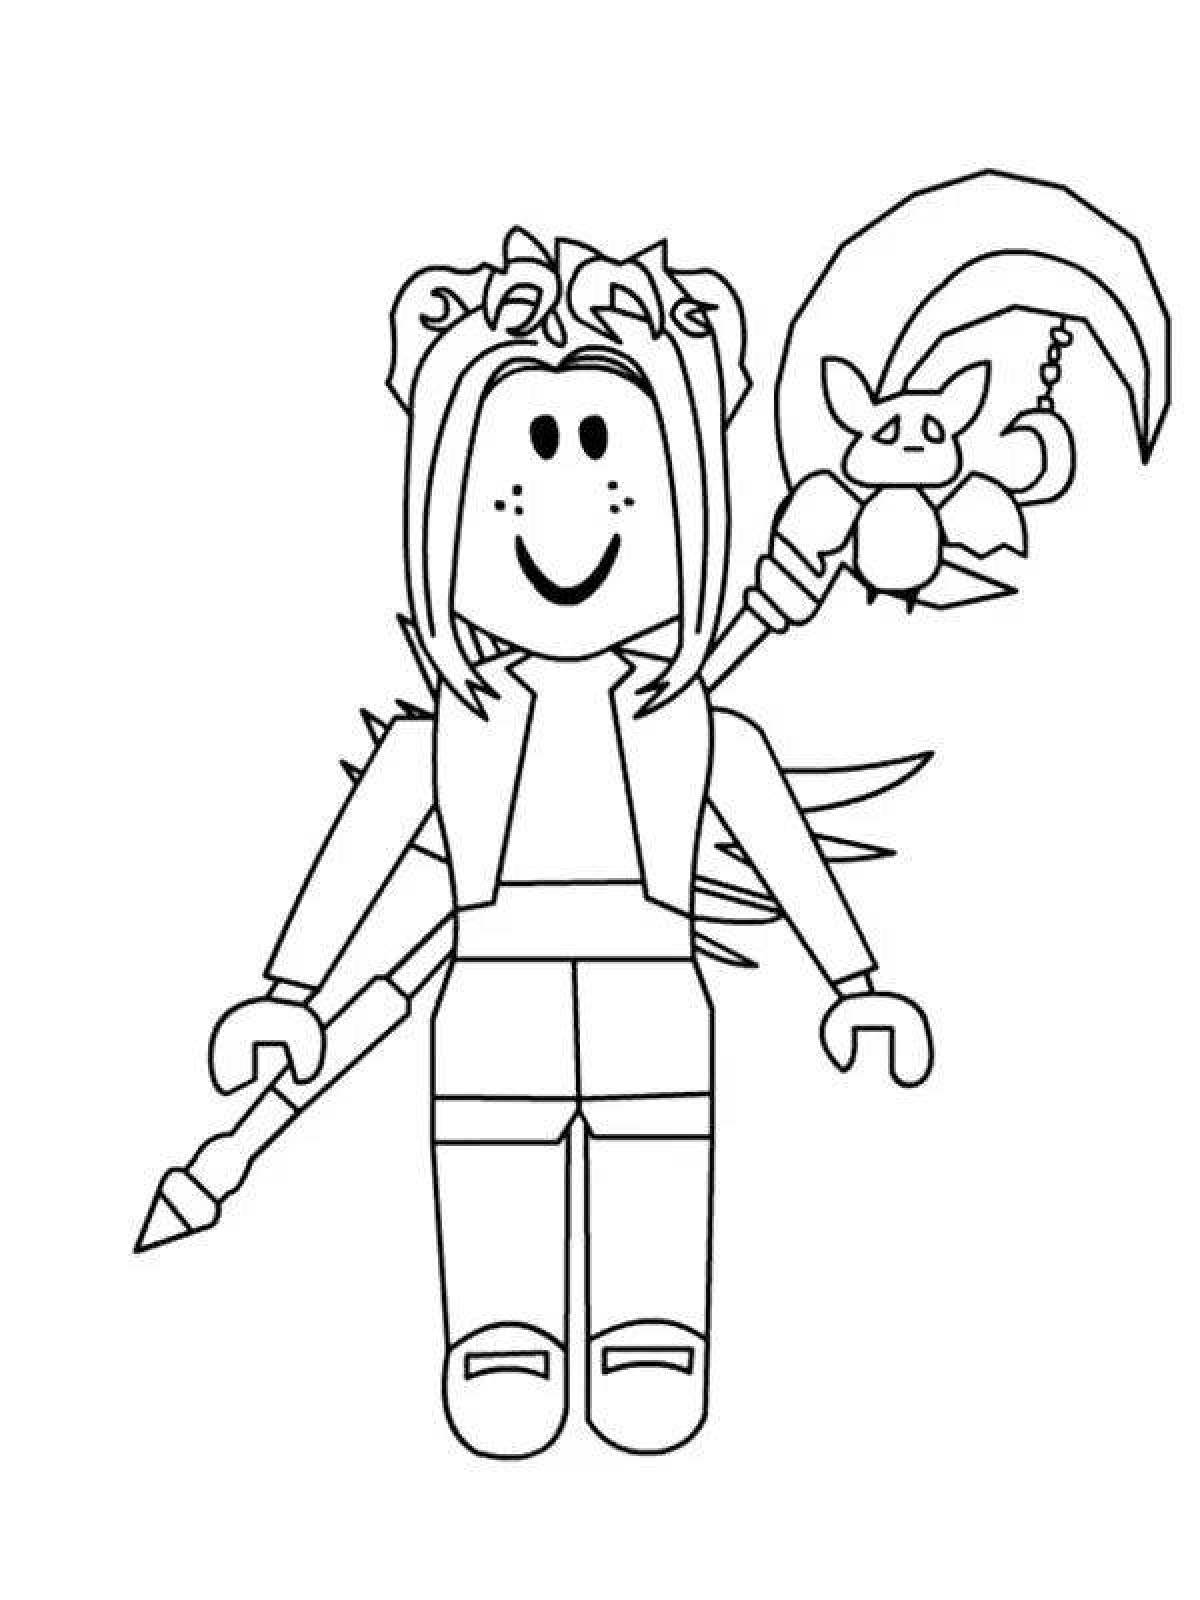 Creative roblox face coloring page